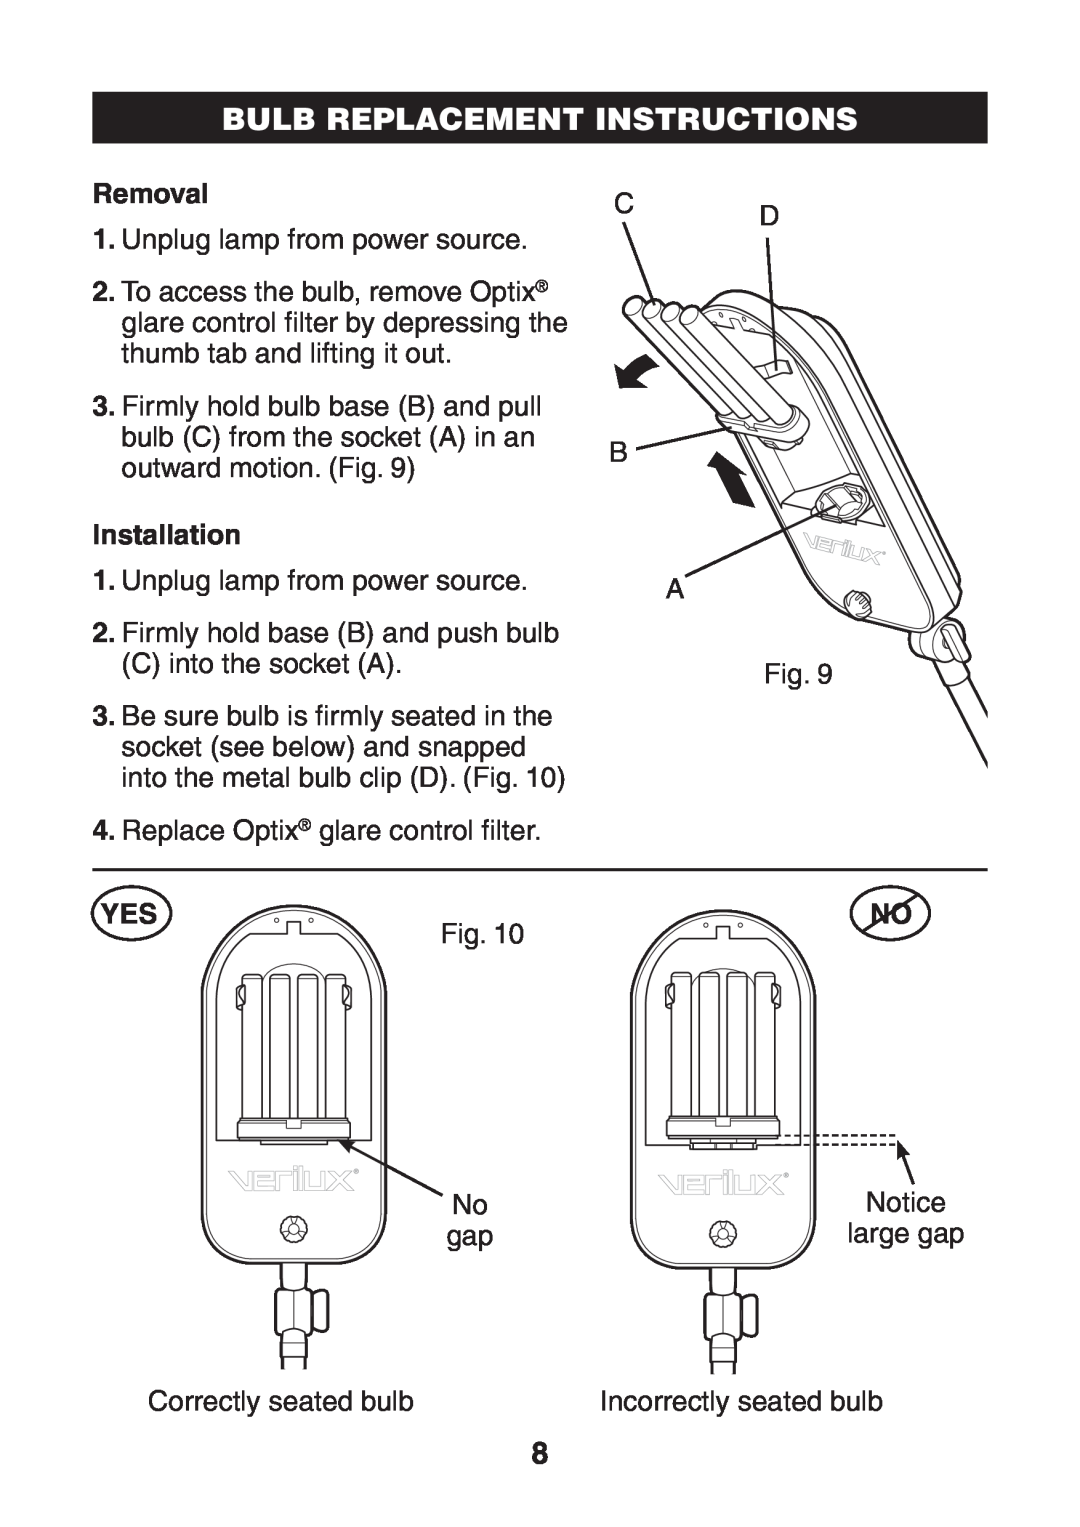 Verilux VF03 manual Bulb Replacement Instructions, Removal, Installation 